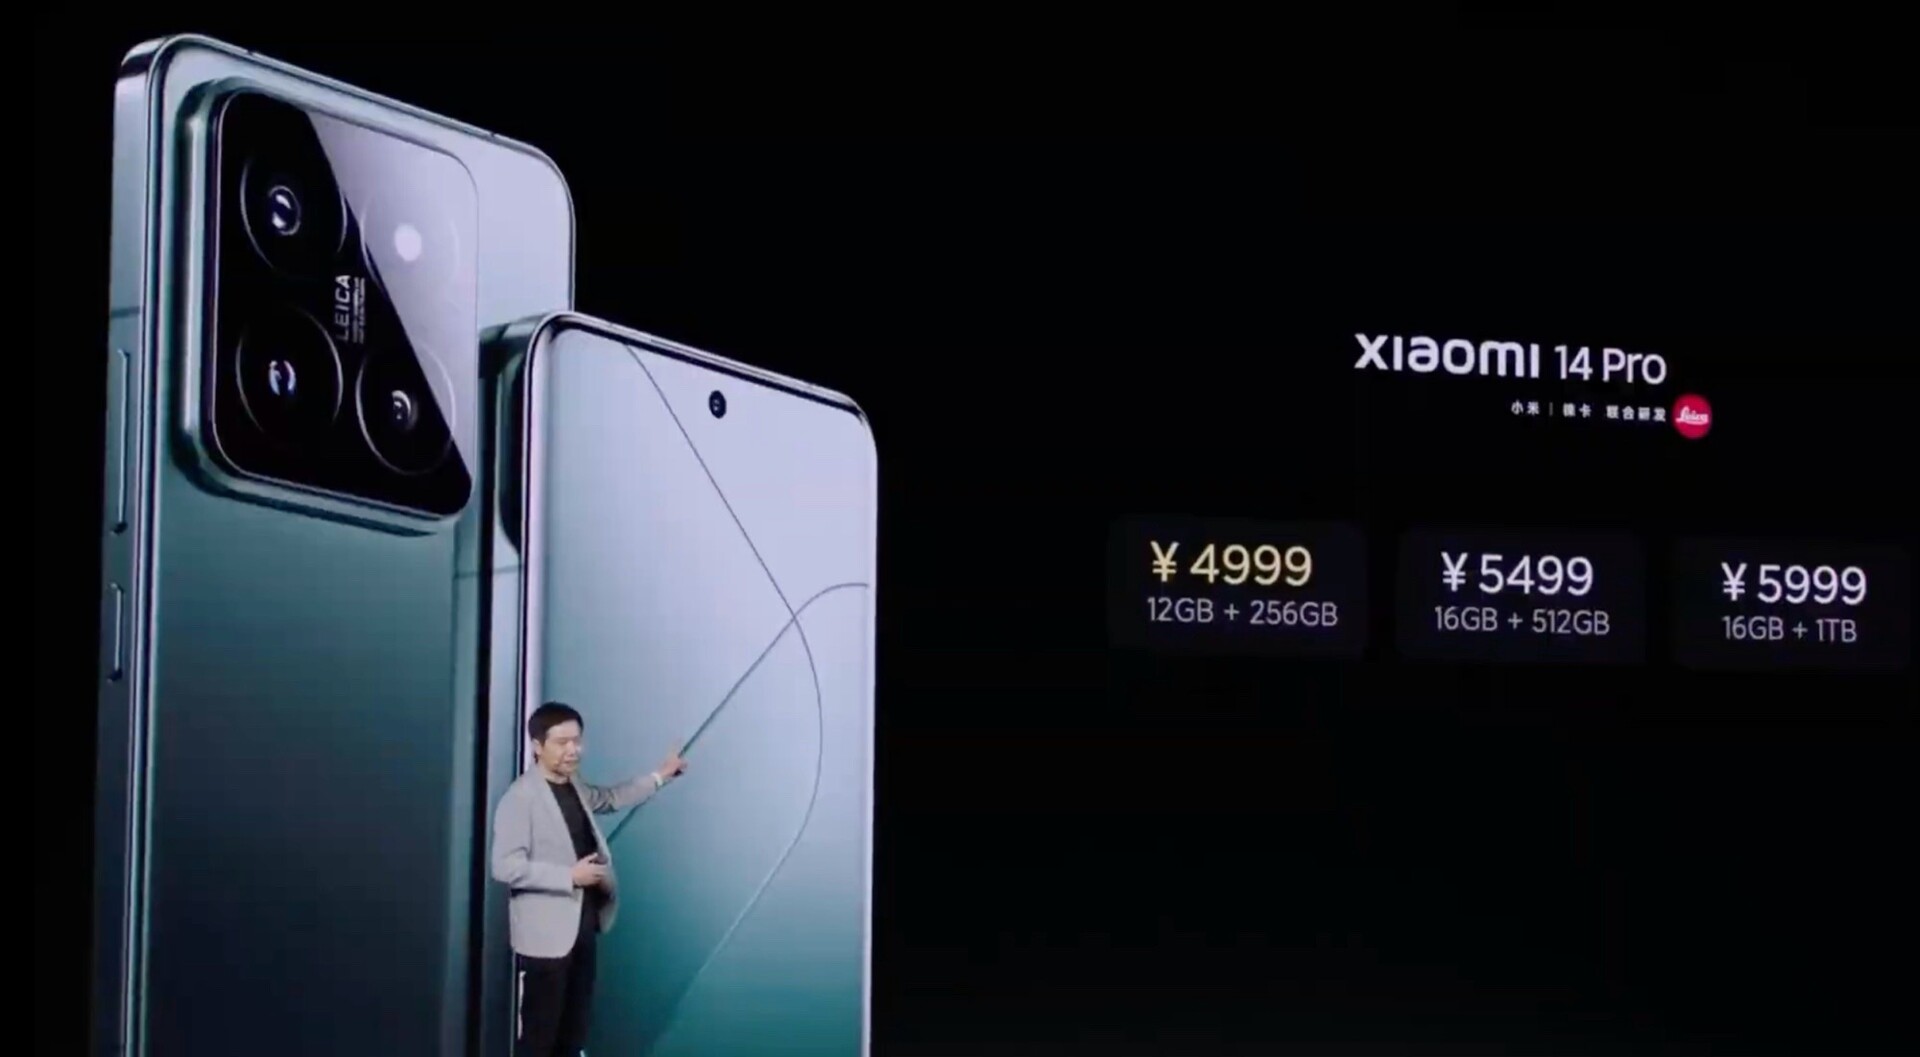 Xiaomi 14 Pro debuts with new variable aperture camera, hardware